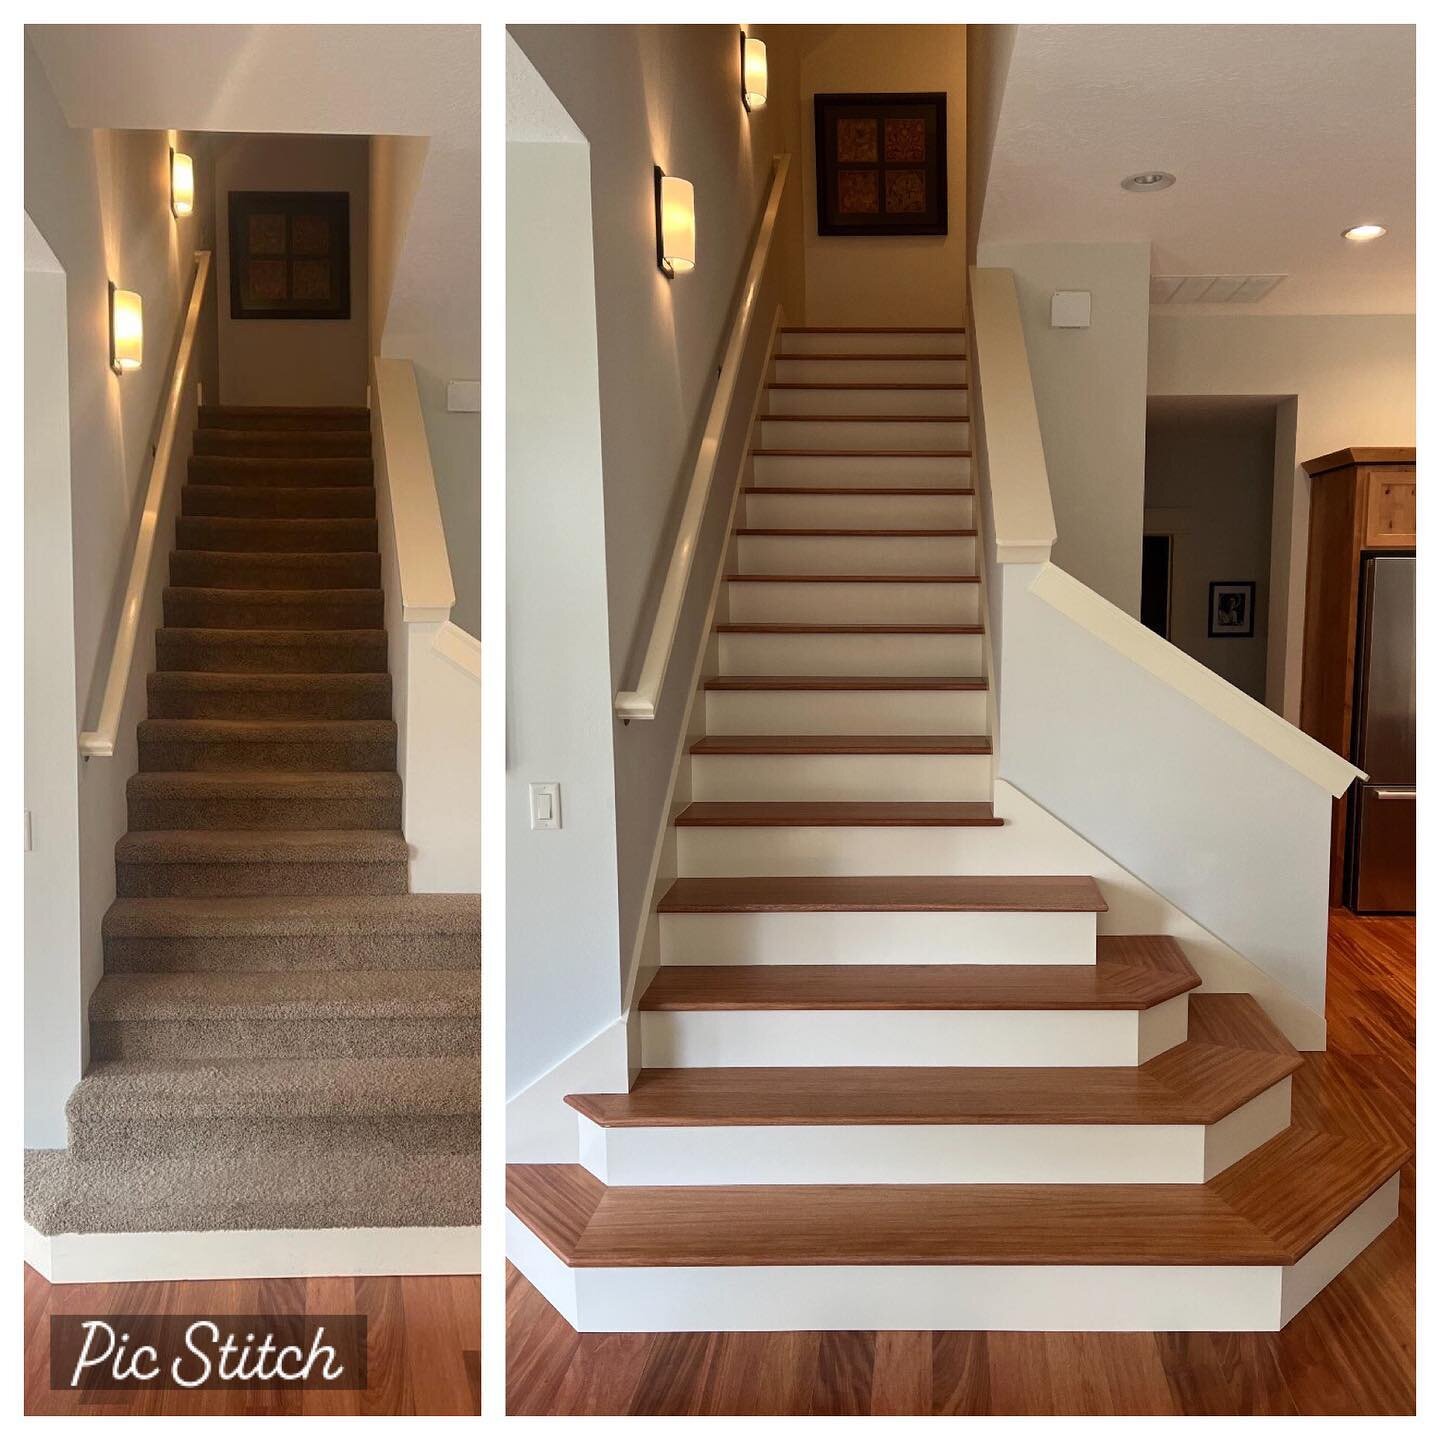 Amazing before and after transformation with the steps in this home! It&rsquo;s as simple as removing the carpet, putting in fresh new paint led skirtboards, painted risers, and new stained treads! How many of 🙌 out of 10?